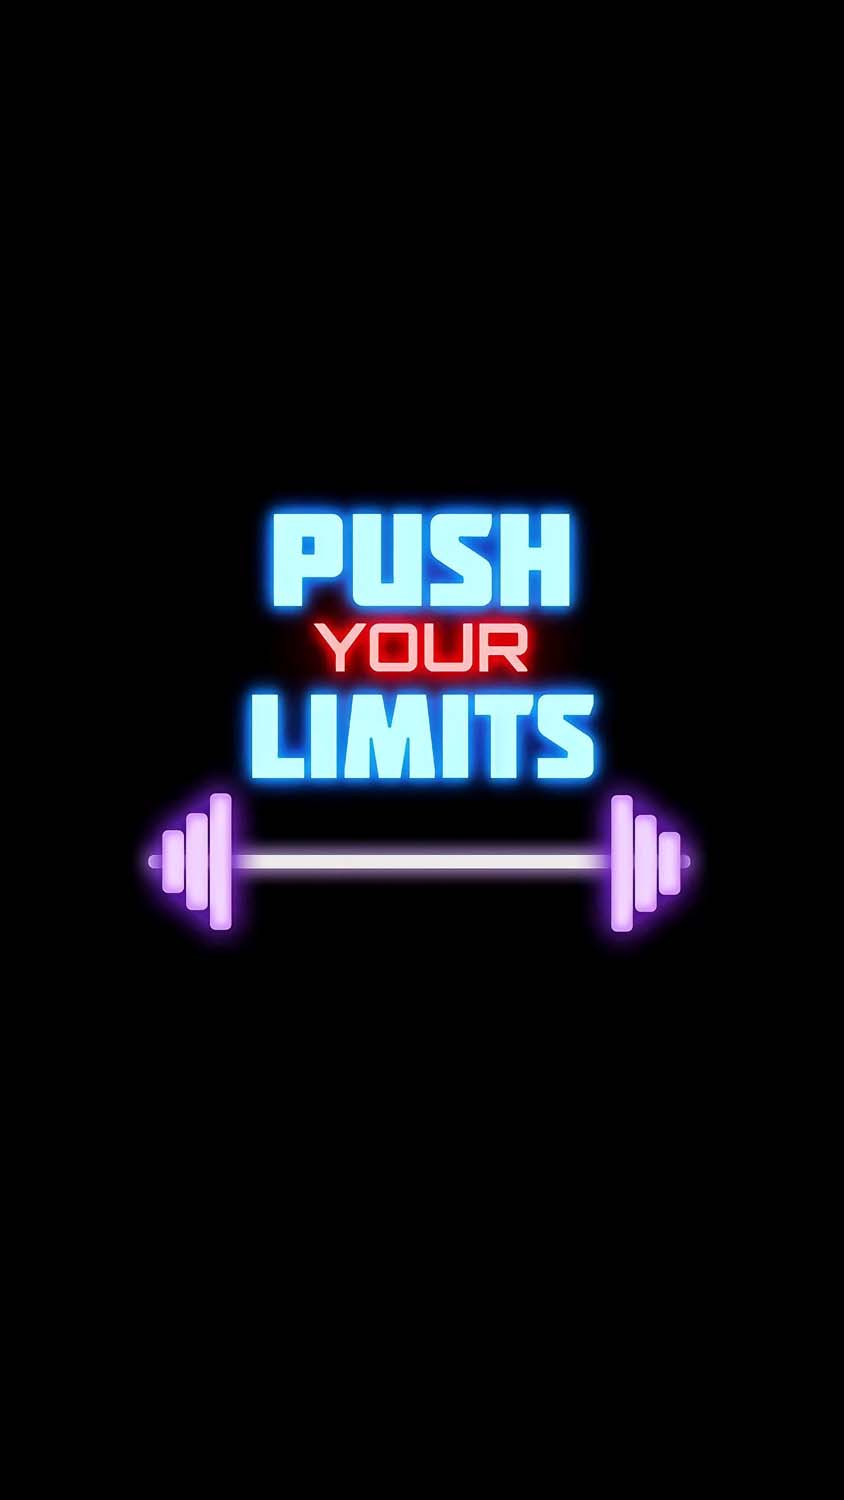 Push Your Limits iPhone Wallpaper HD